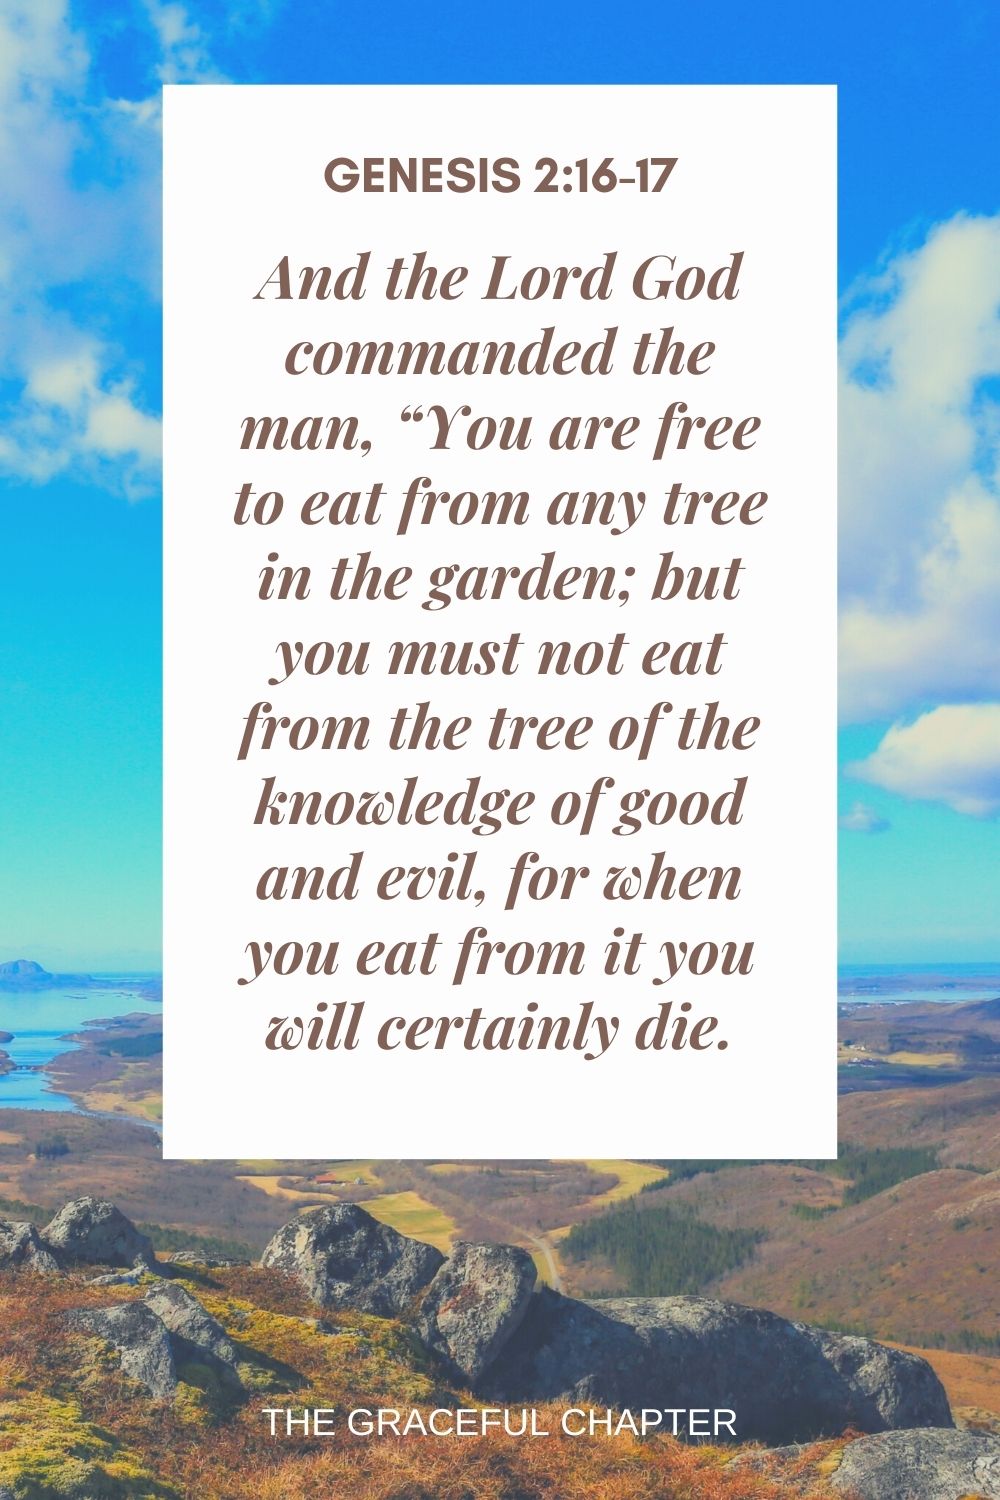 And the Lord God commanded the man, “You are free to eat from any tree in the garden; but you must not eat from the tree of the knowledge of good and evil, for when you eat from it you will certainly die. Genesis 2:16-17